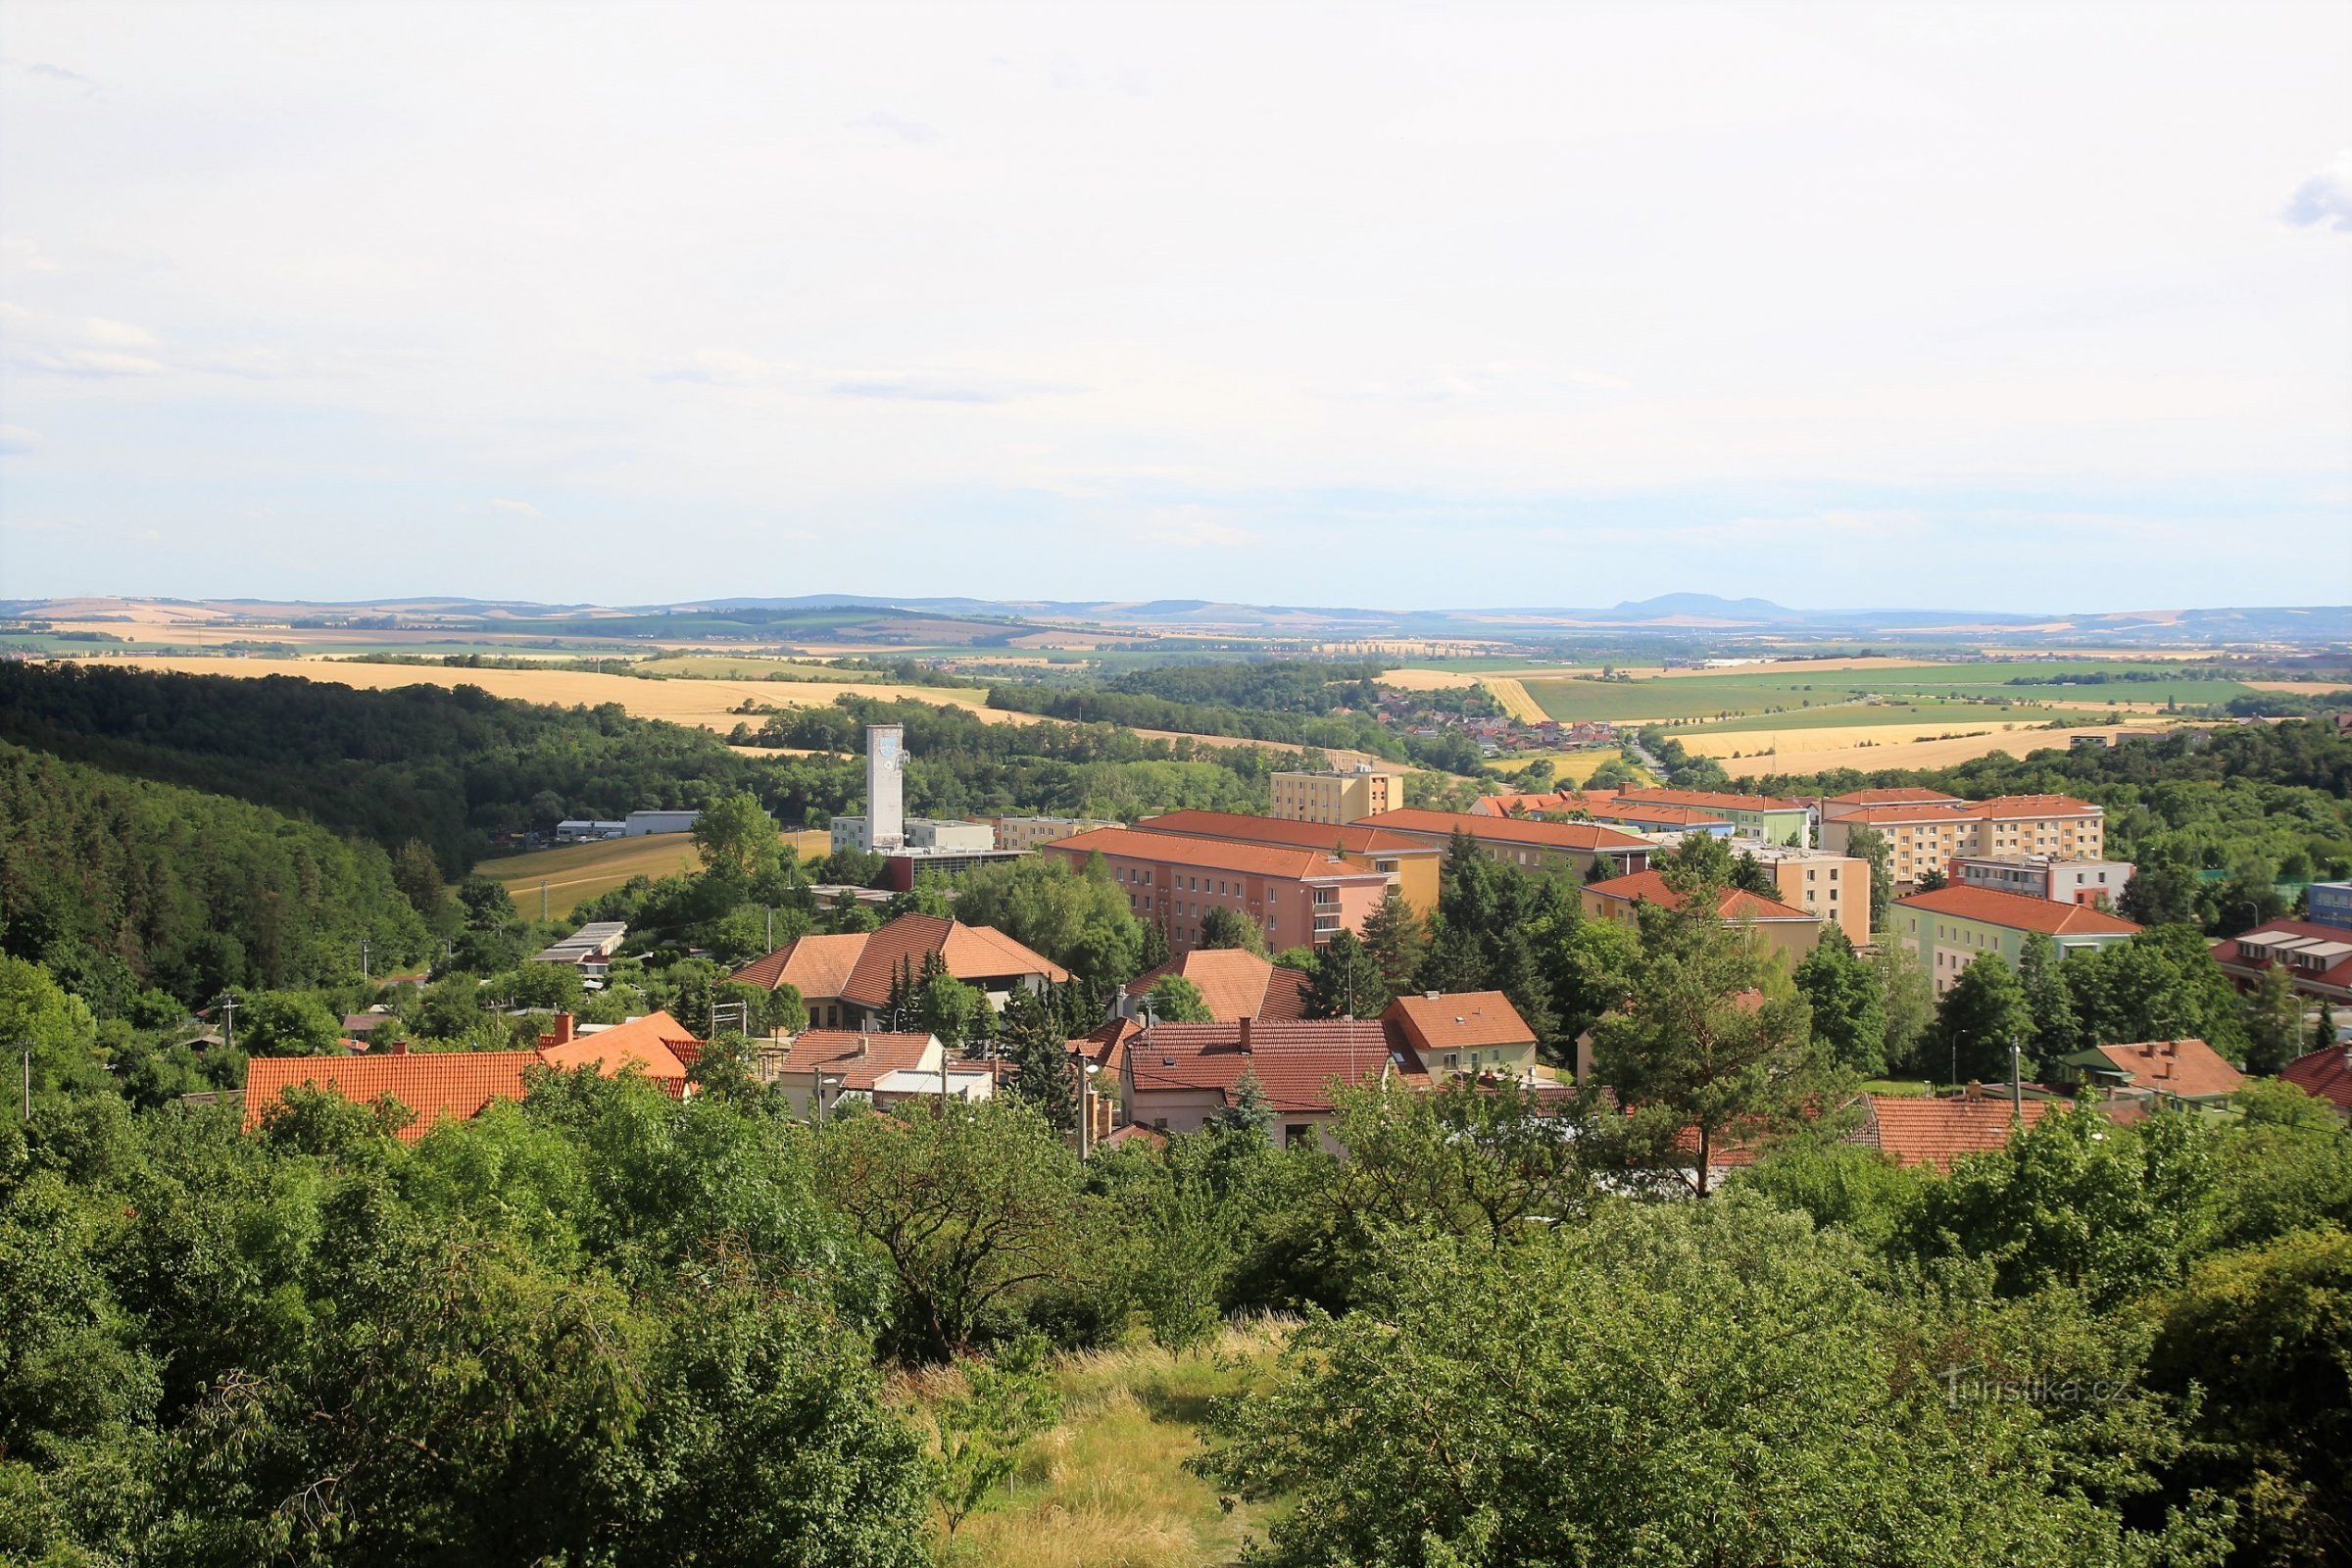 View from the observation tower of the village of Mokrou and the South Moravian plains